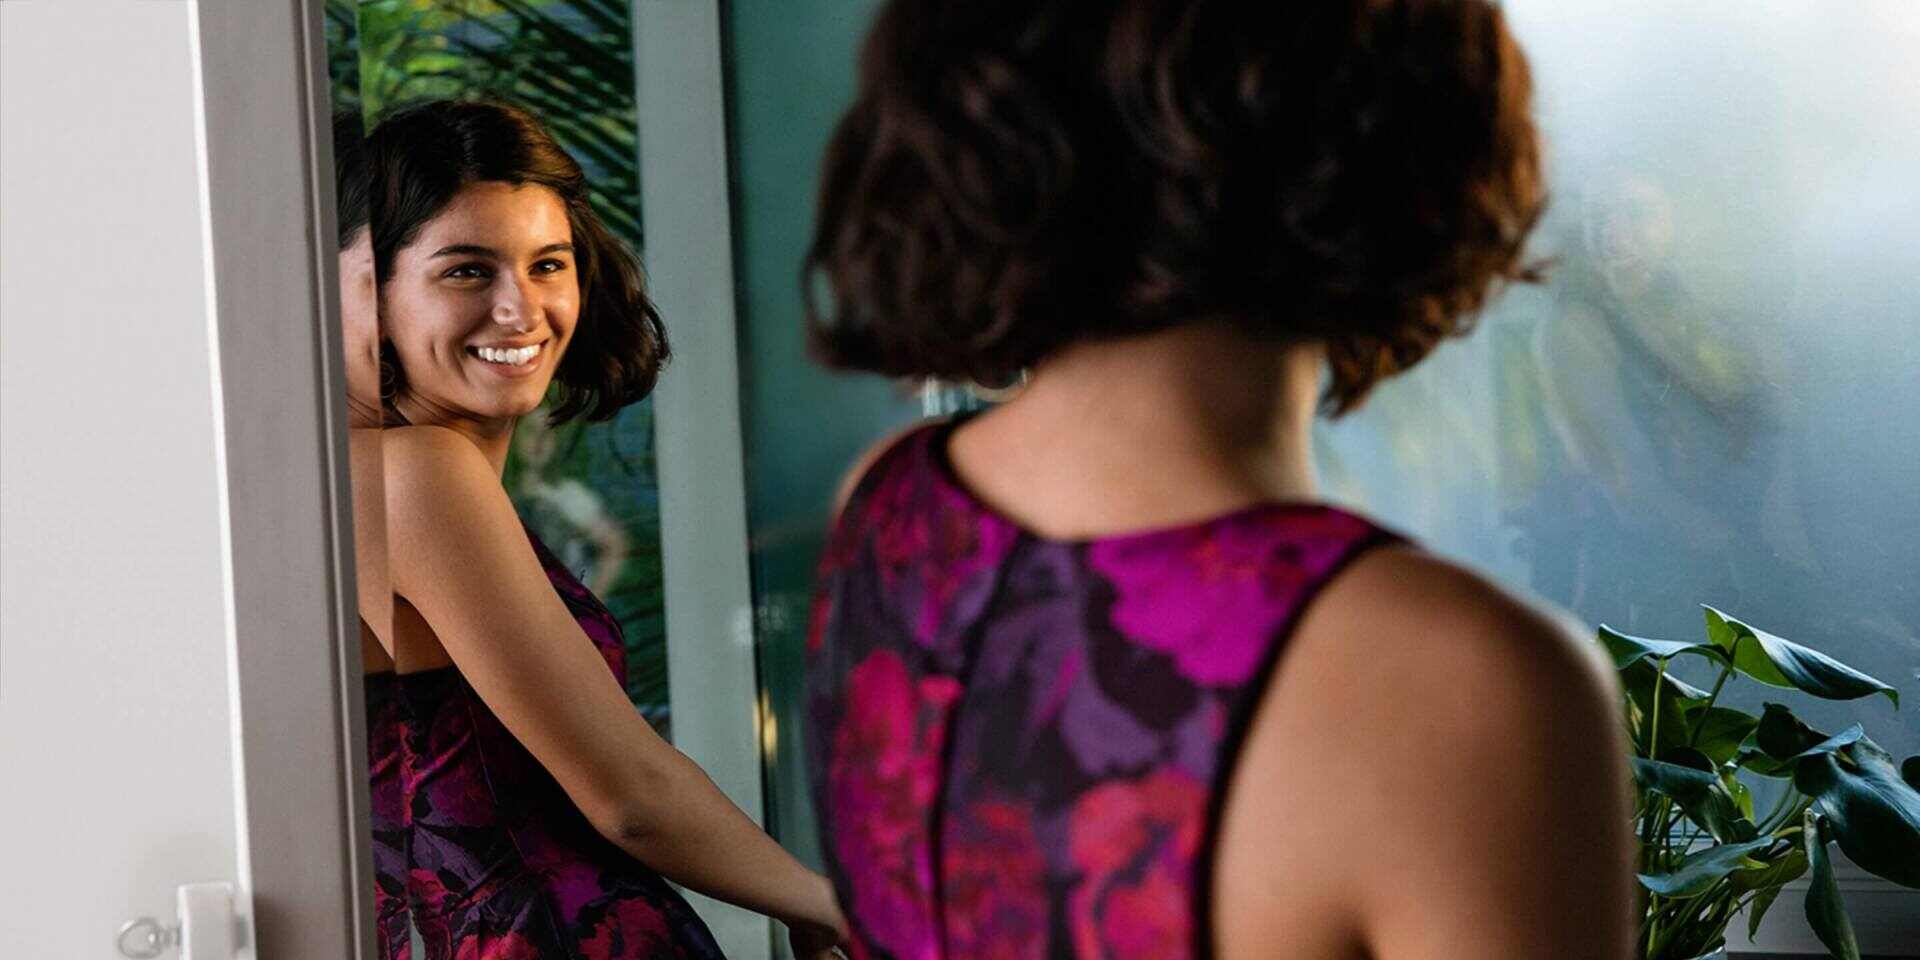 Girl smiling looking at the mirror - how Invisalign works